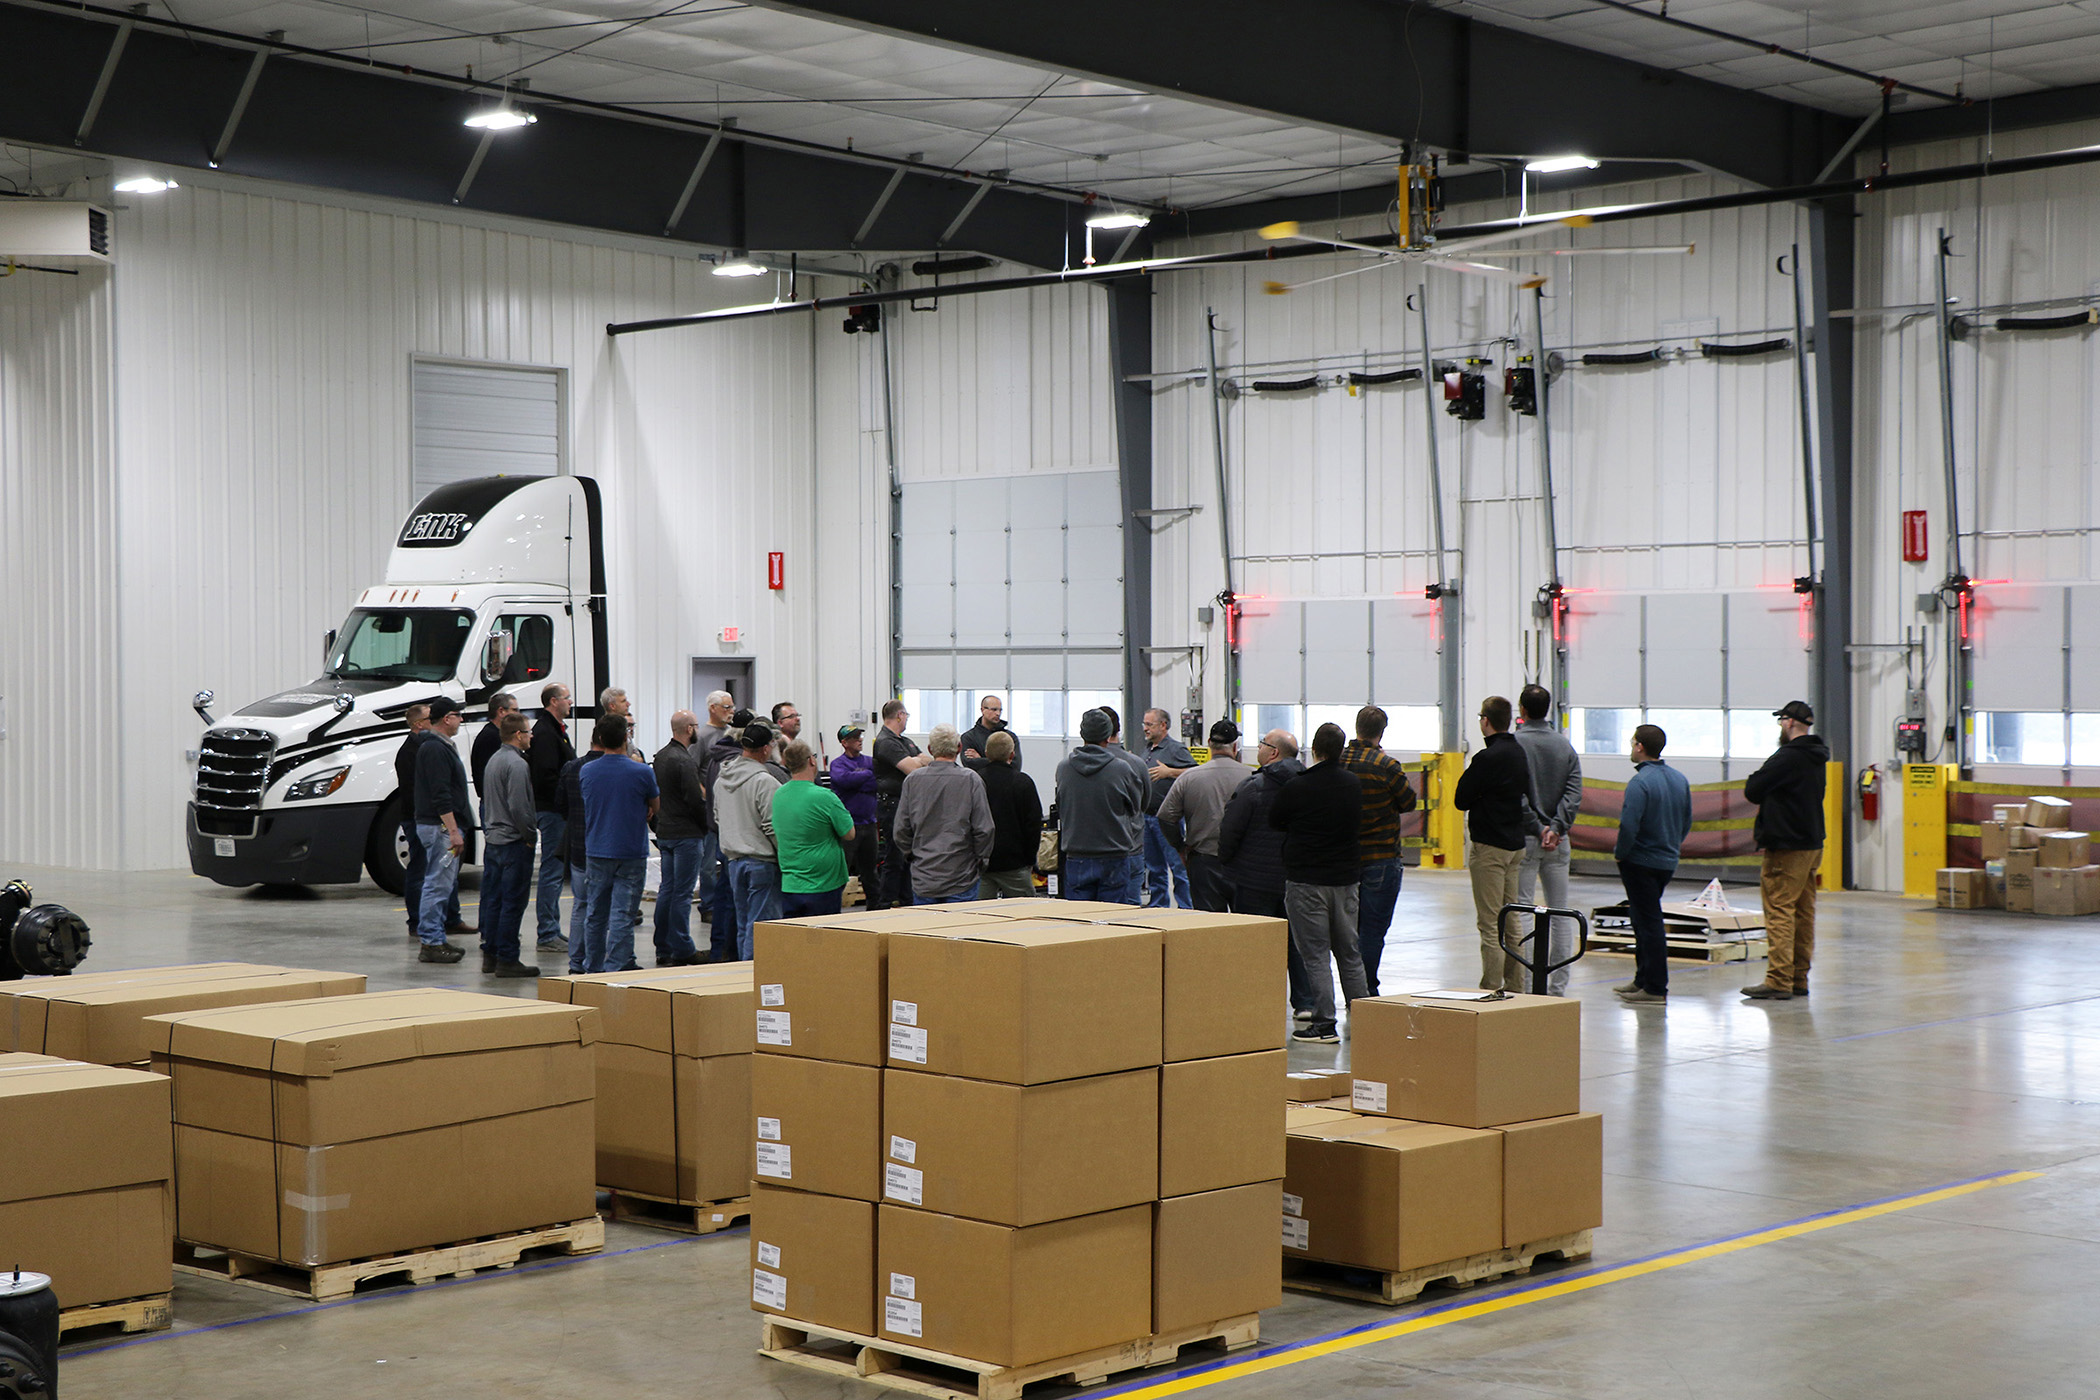 The new Plant 4 will also serve as Link’s new consolidated shipping and receiving hub, continuing to leverage Iowa’s location near the geographic center of the country and transportation corridors.